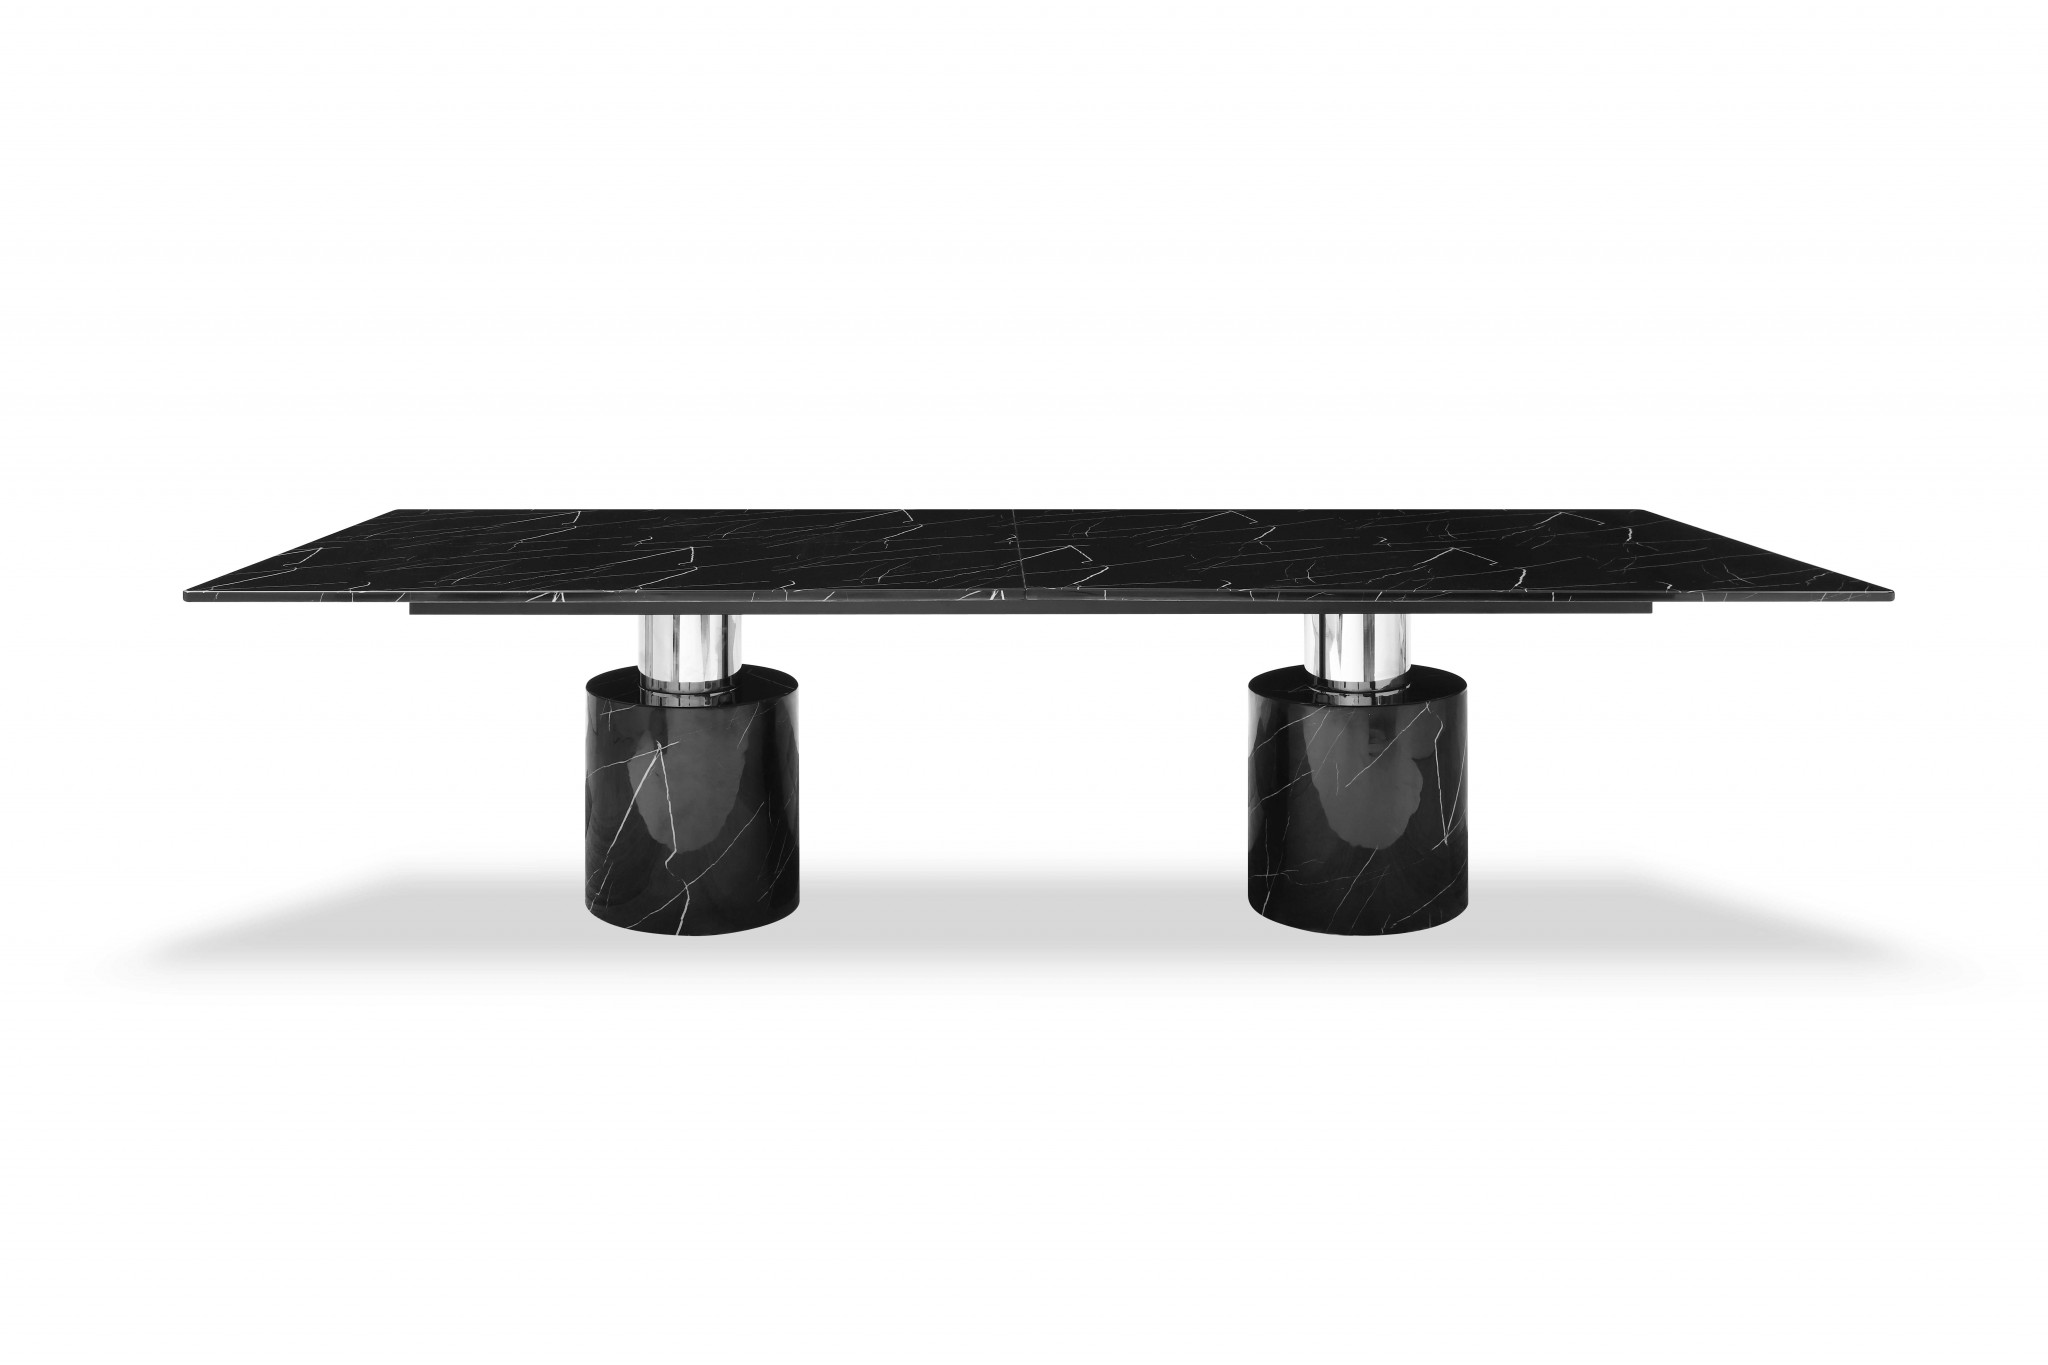 120" X 48" X 30" Black Marble Stainless Steel Dining Table